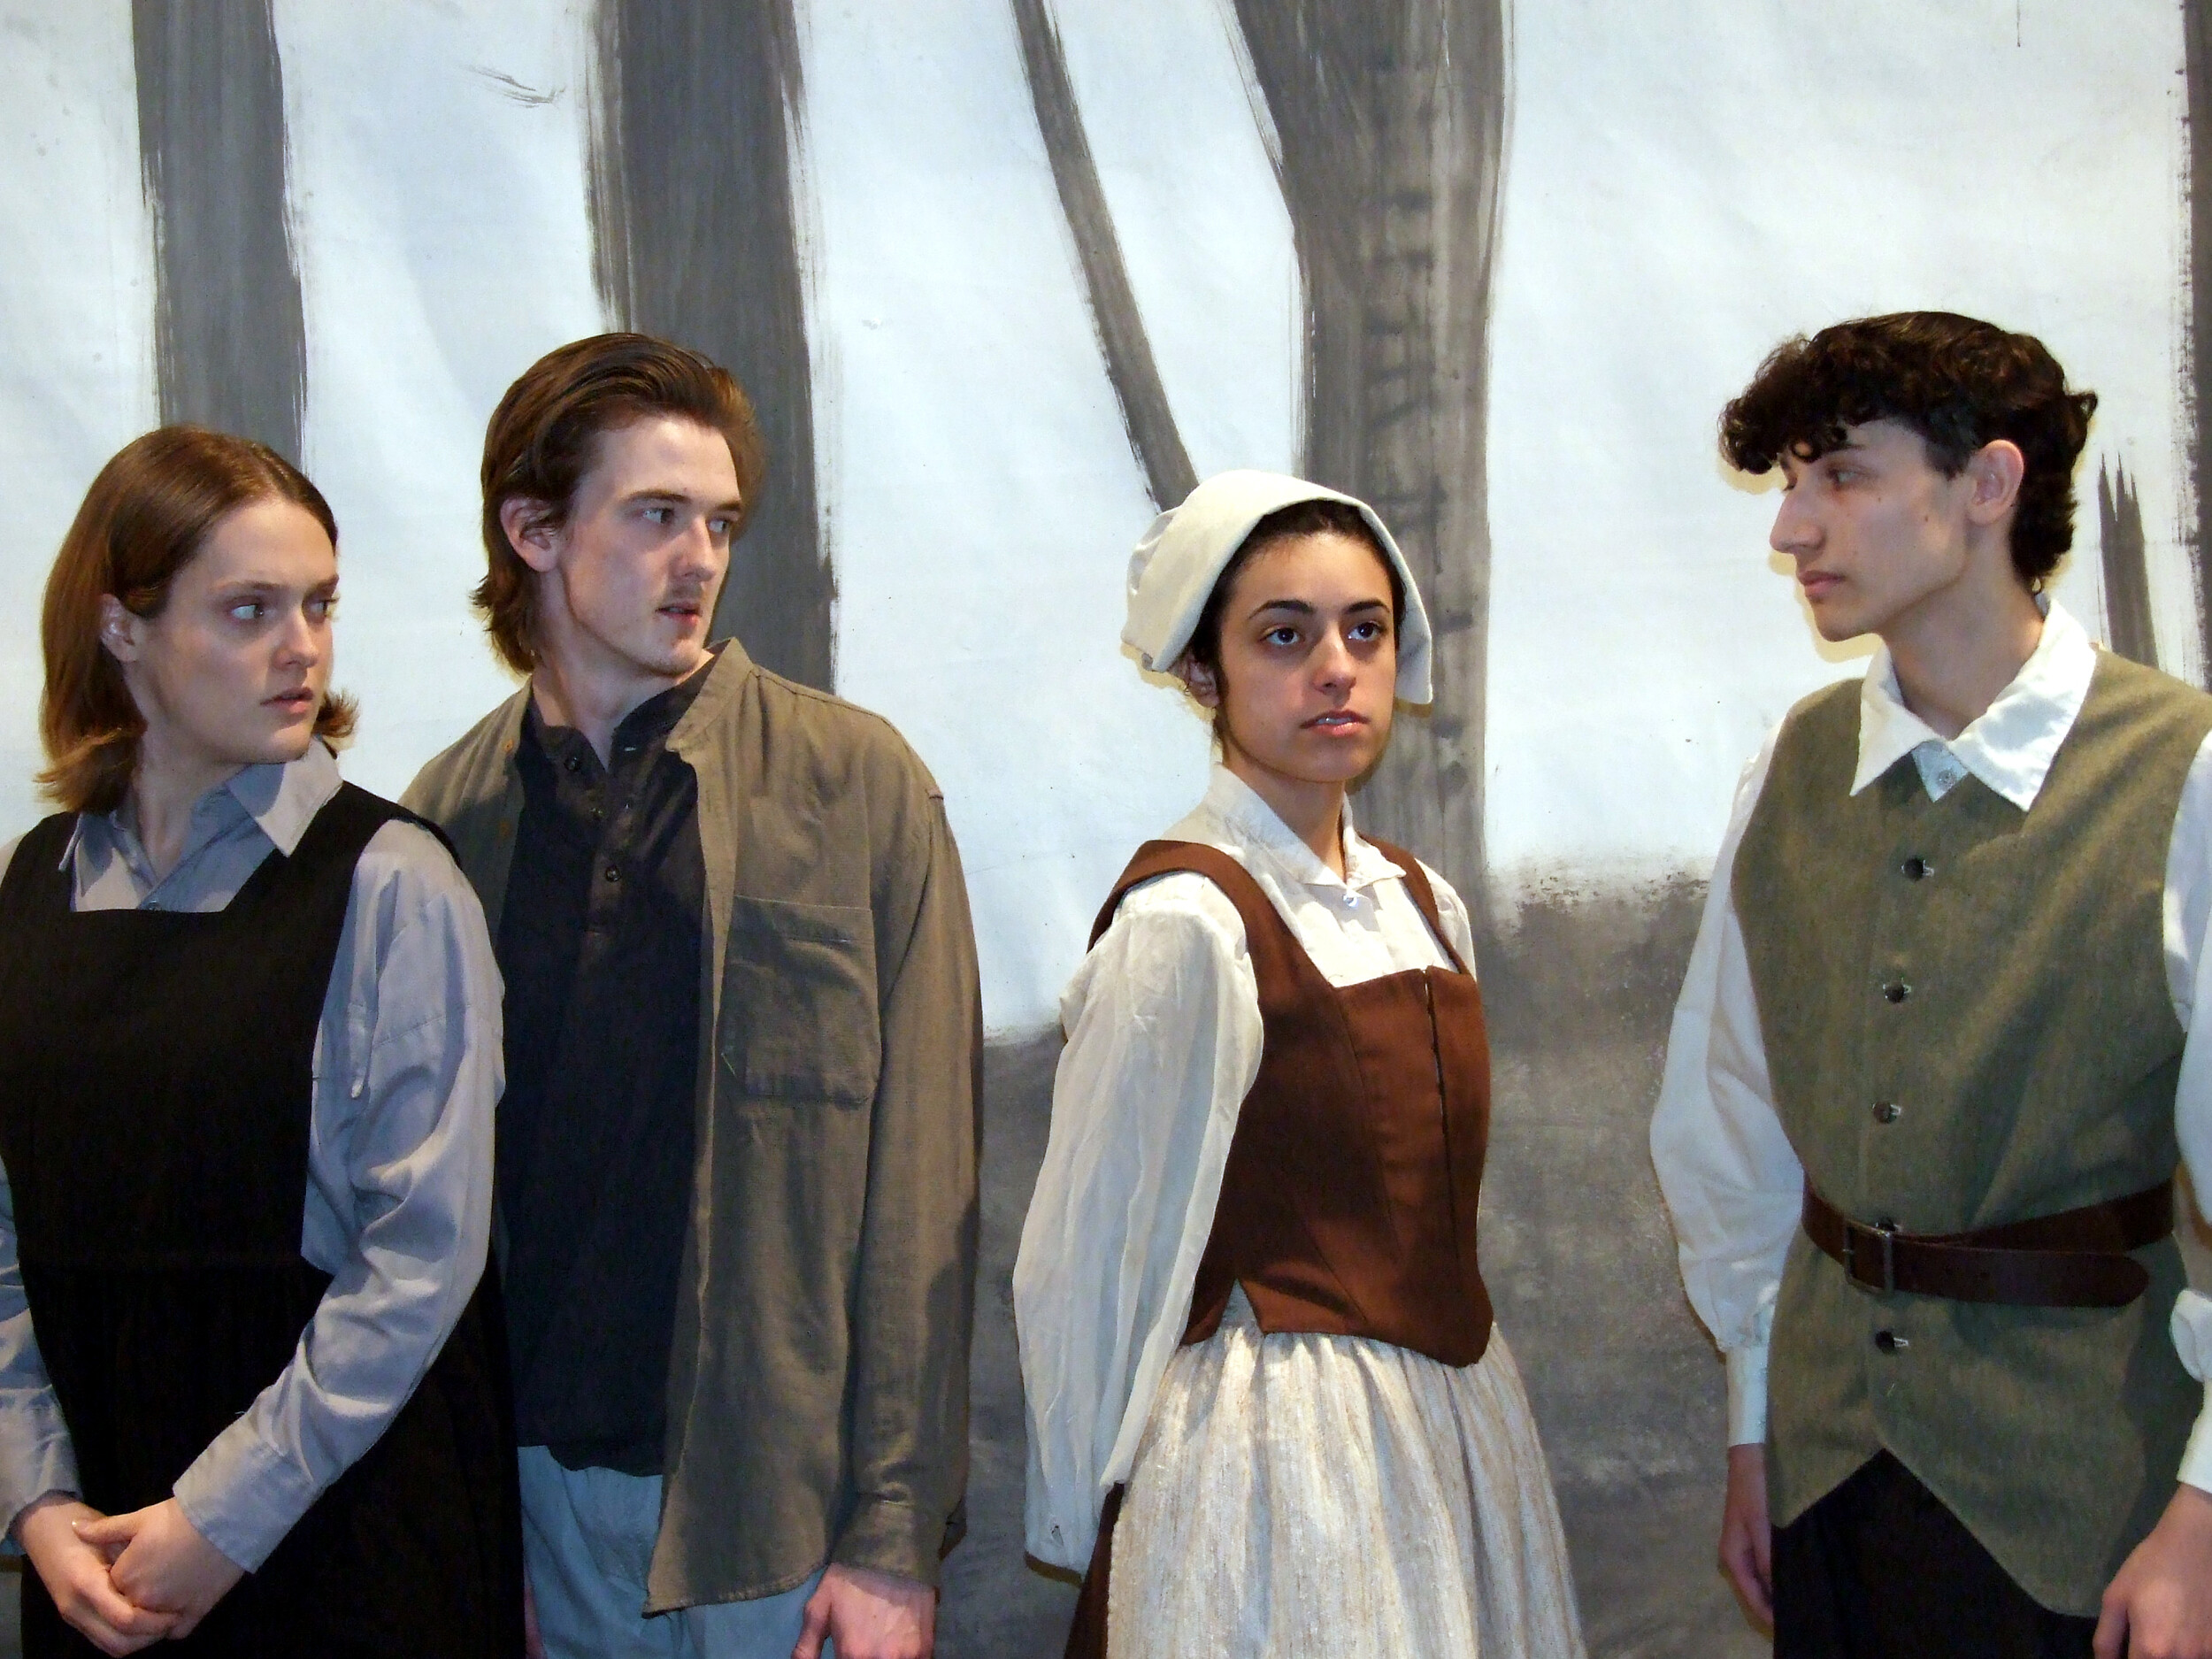 The casts of the Department of Theatre and Dance productions of The Crucible and Abigail/1702: A Twice-told Tale